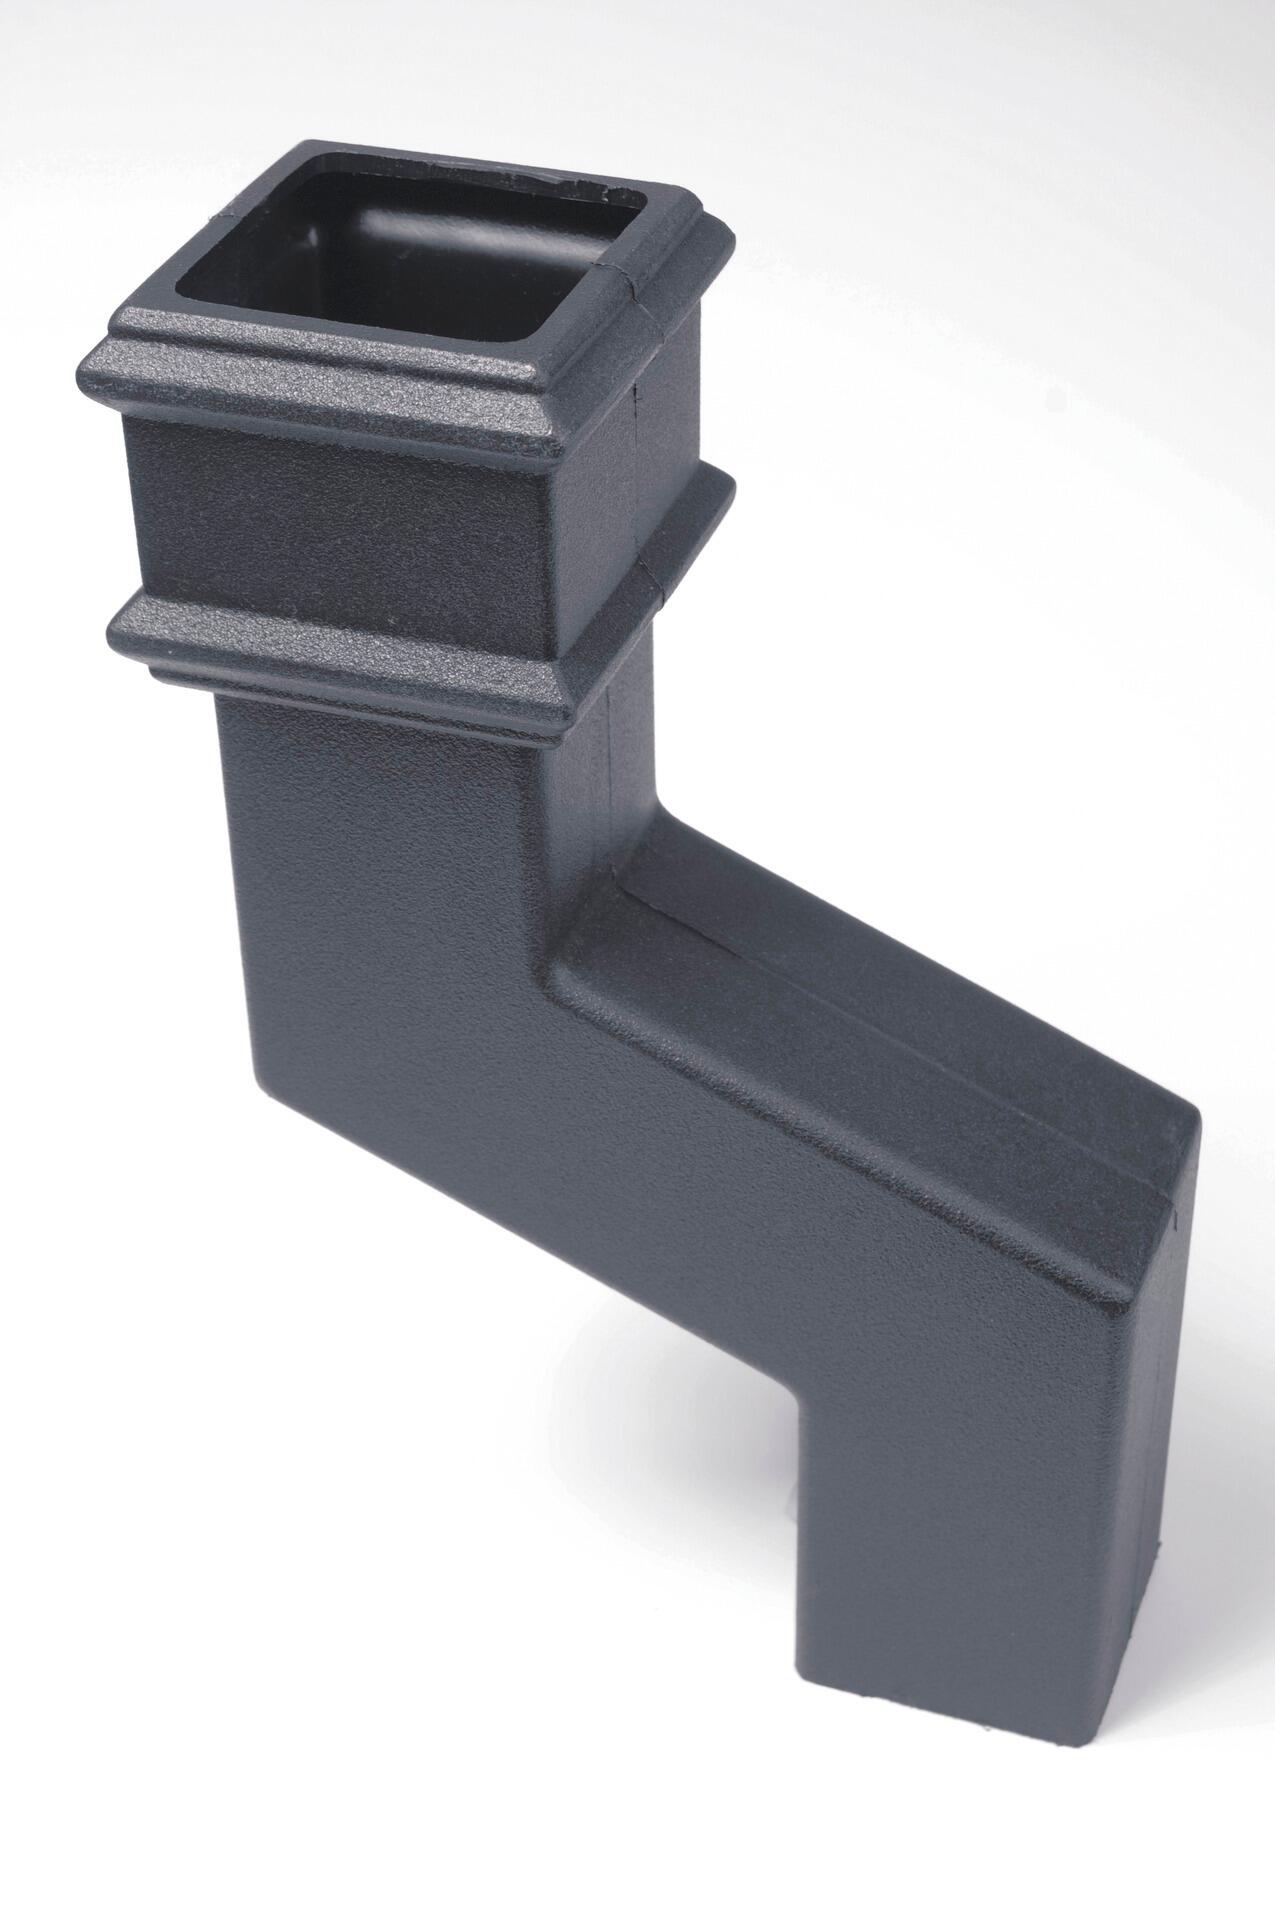 Cascade 150mm Offset For Square Downpipe 65mm - Plastic Drainage